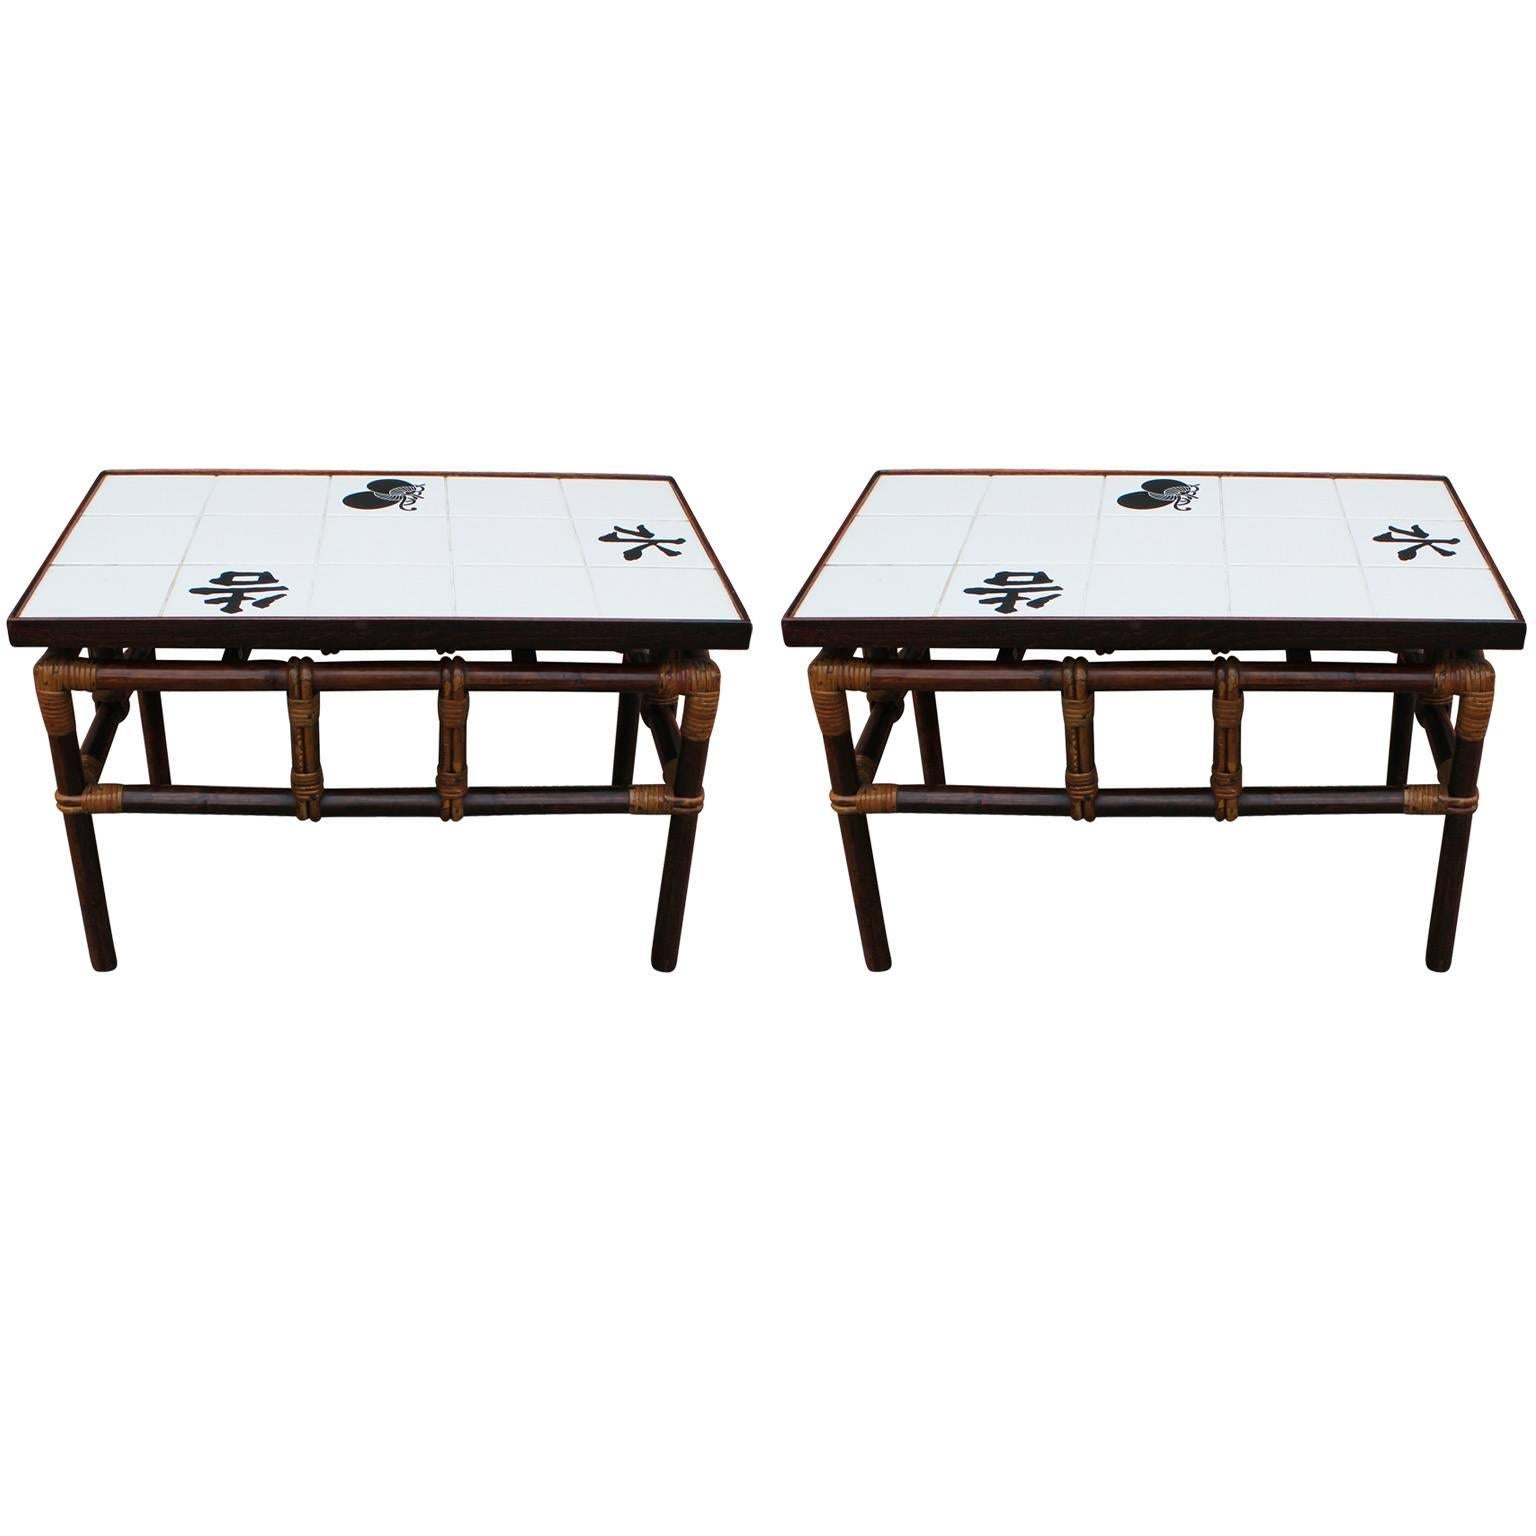 Excellent pair of ficks reed side tables. Tables have white tile tops and bamboo bases.